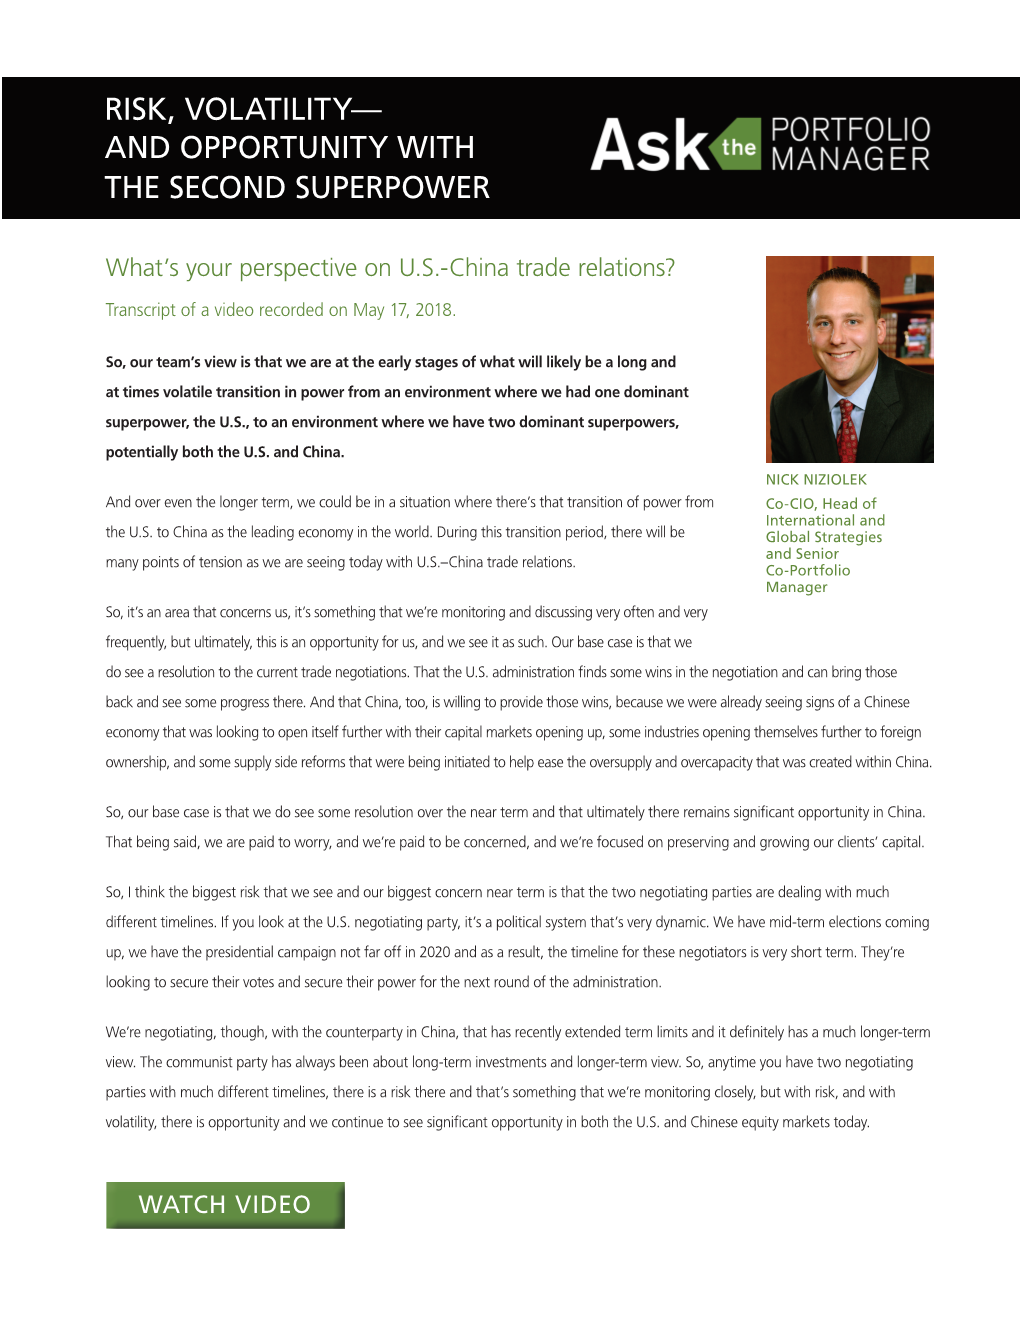 Risk, Volatility— and Opportunity with the Second Superpower